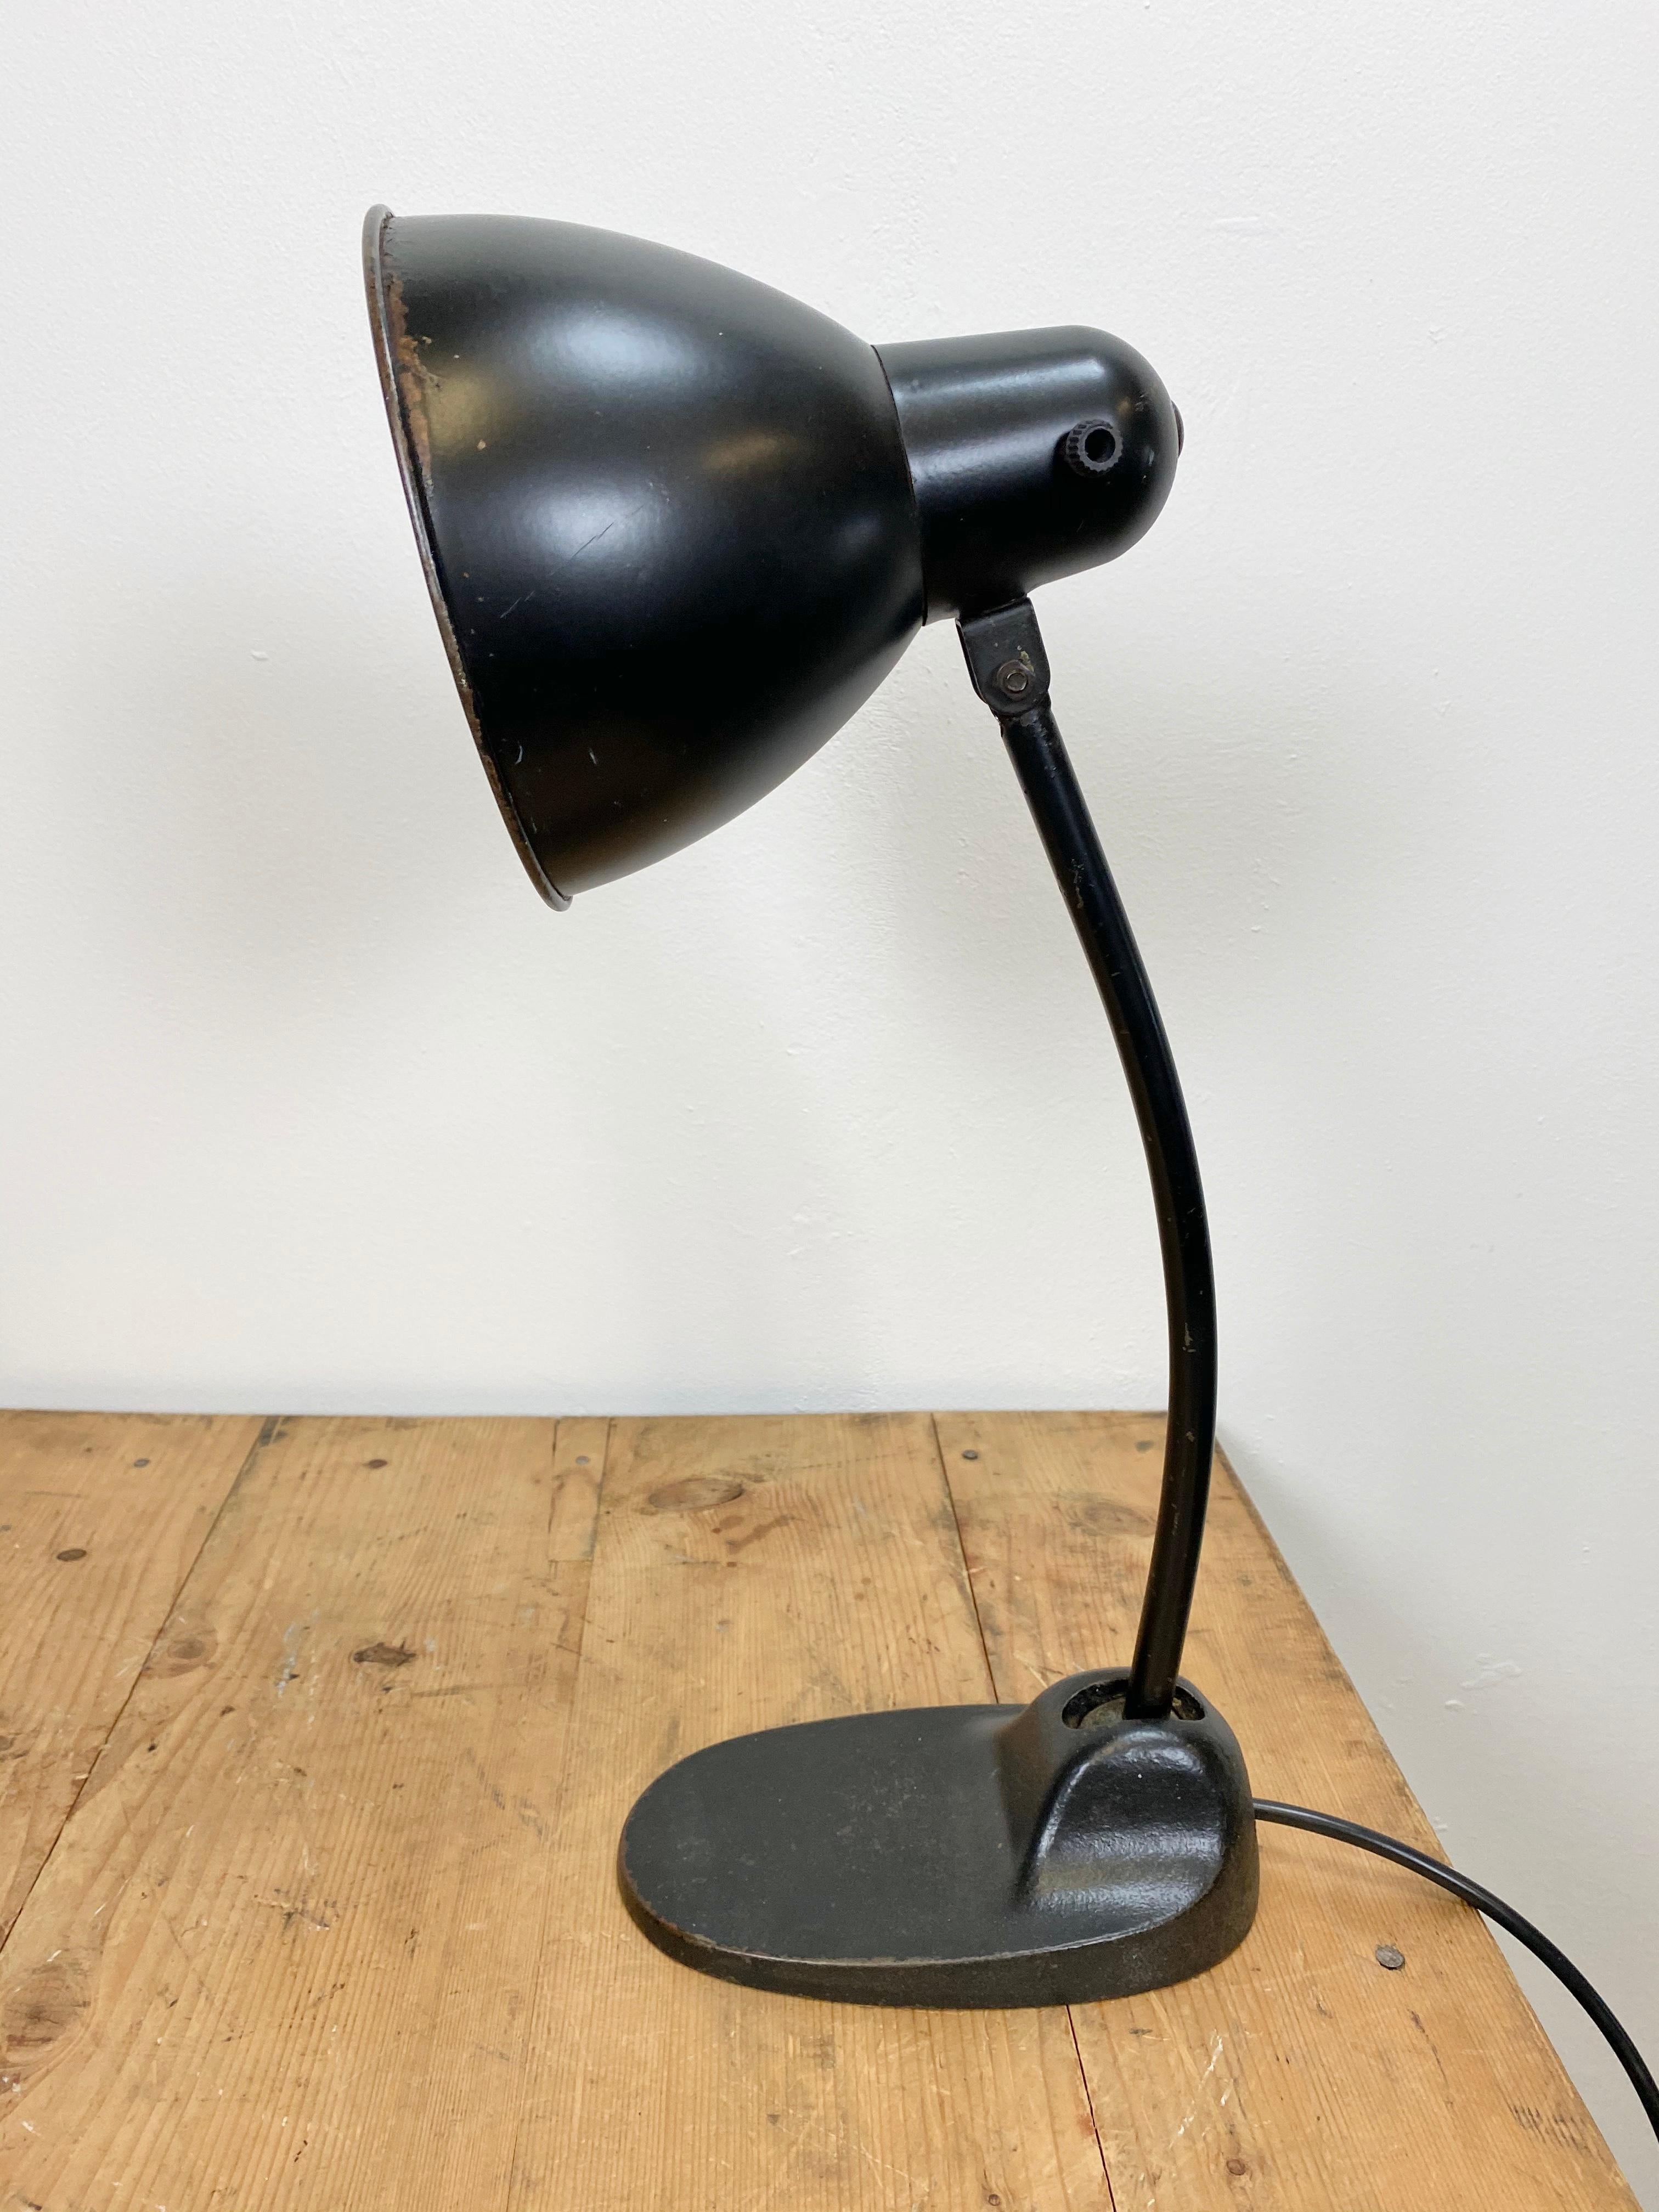 This Bauhaus industrial desk lamp was made during the 1930s. The lamp has black metal shade, silver interior, black iron base and arm with two adjustable joints. It features the socket for E27 lighbulbs with a rotary switch and new wire. Diameter of